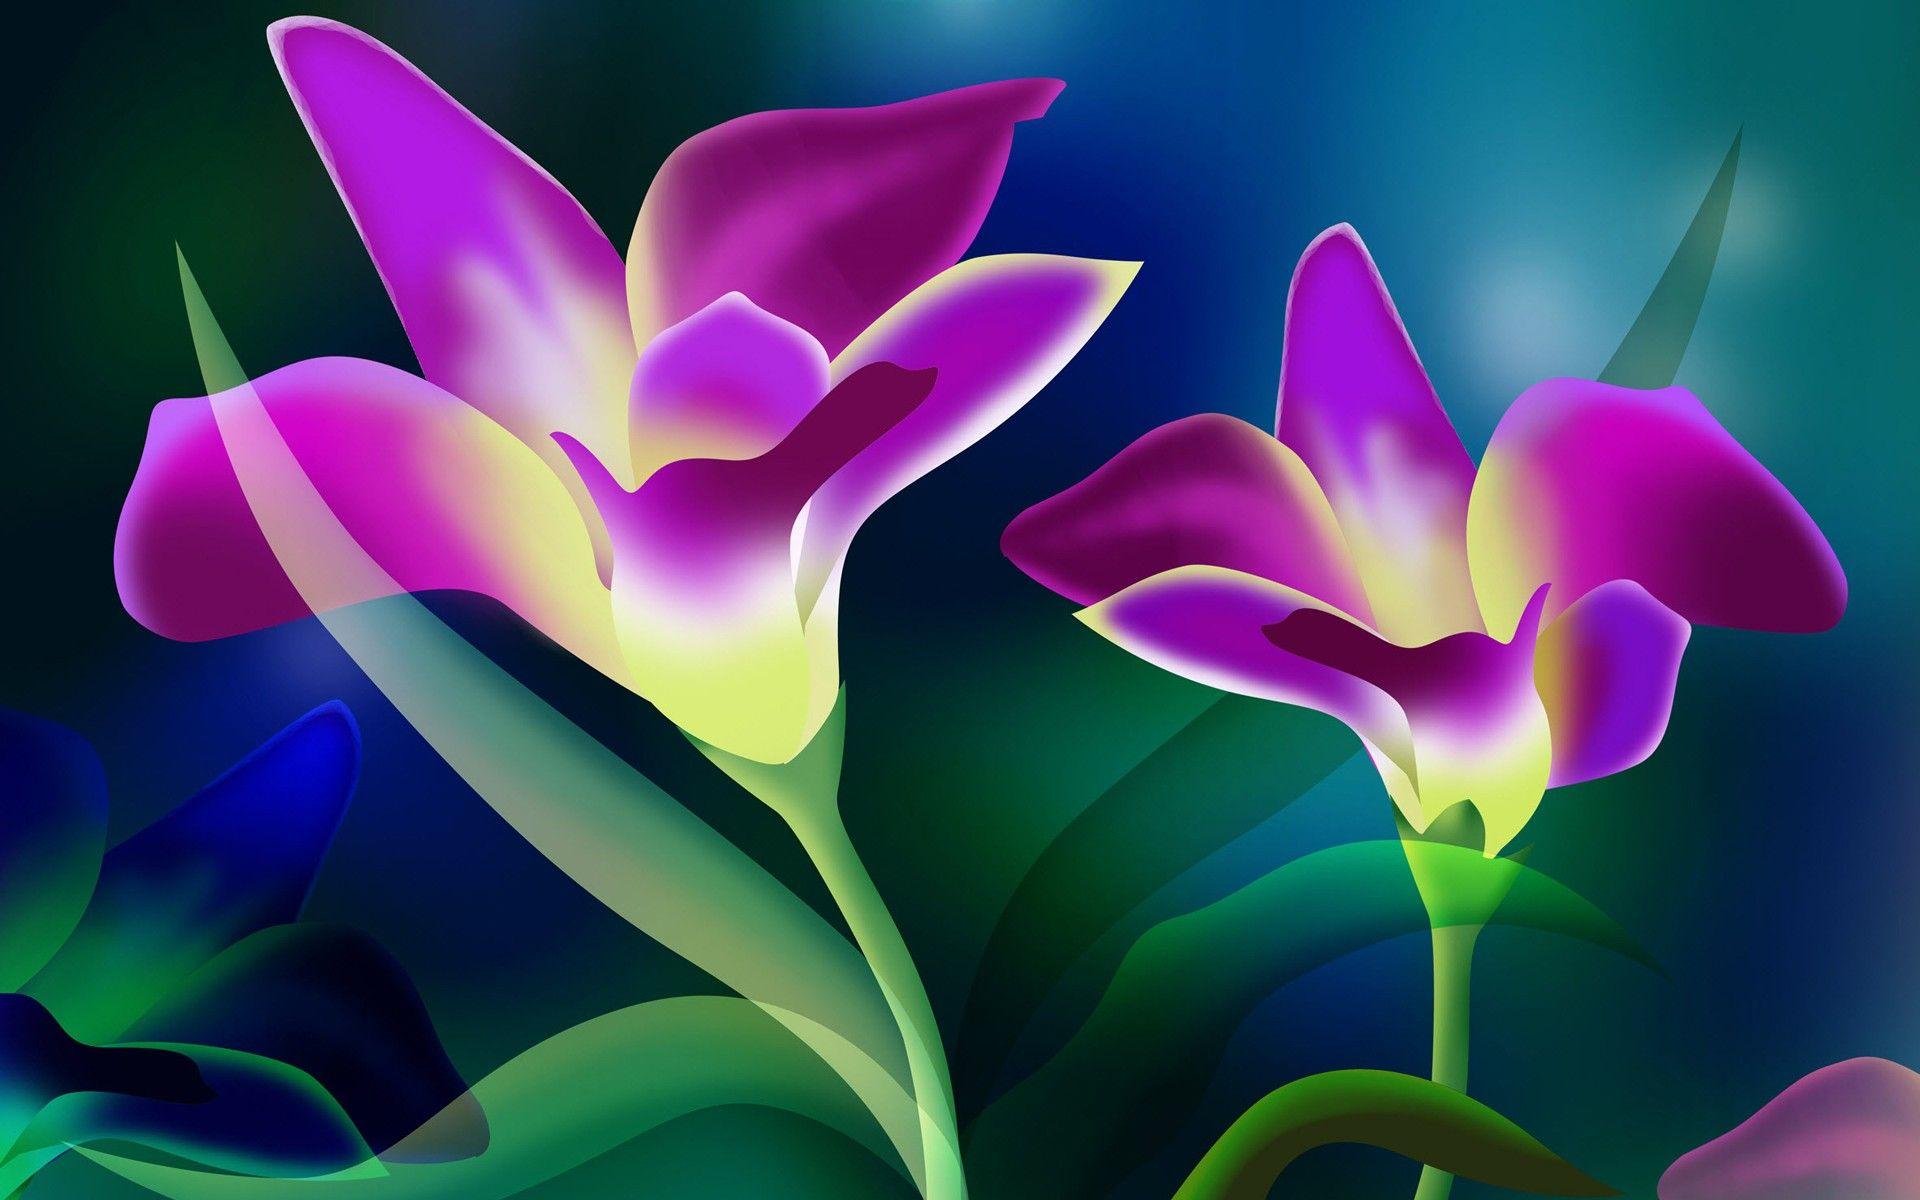 Cool Abstract Flowers HD Wallpaper for Background. HD Wallpaper 201